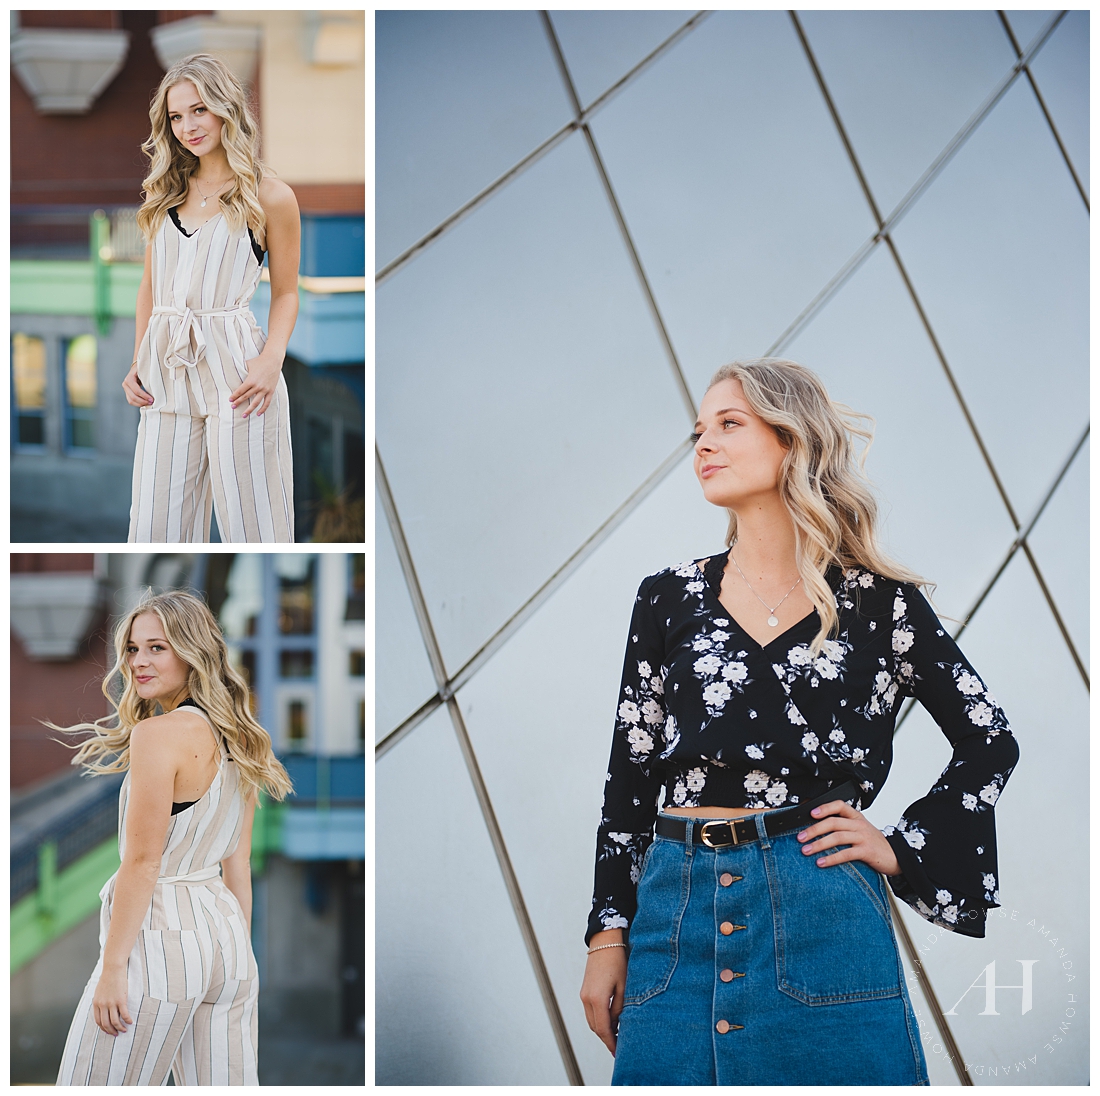 Senior Portraits at the Museum of Glass | Photographed by Amanda Howse